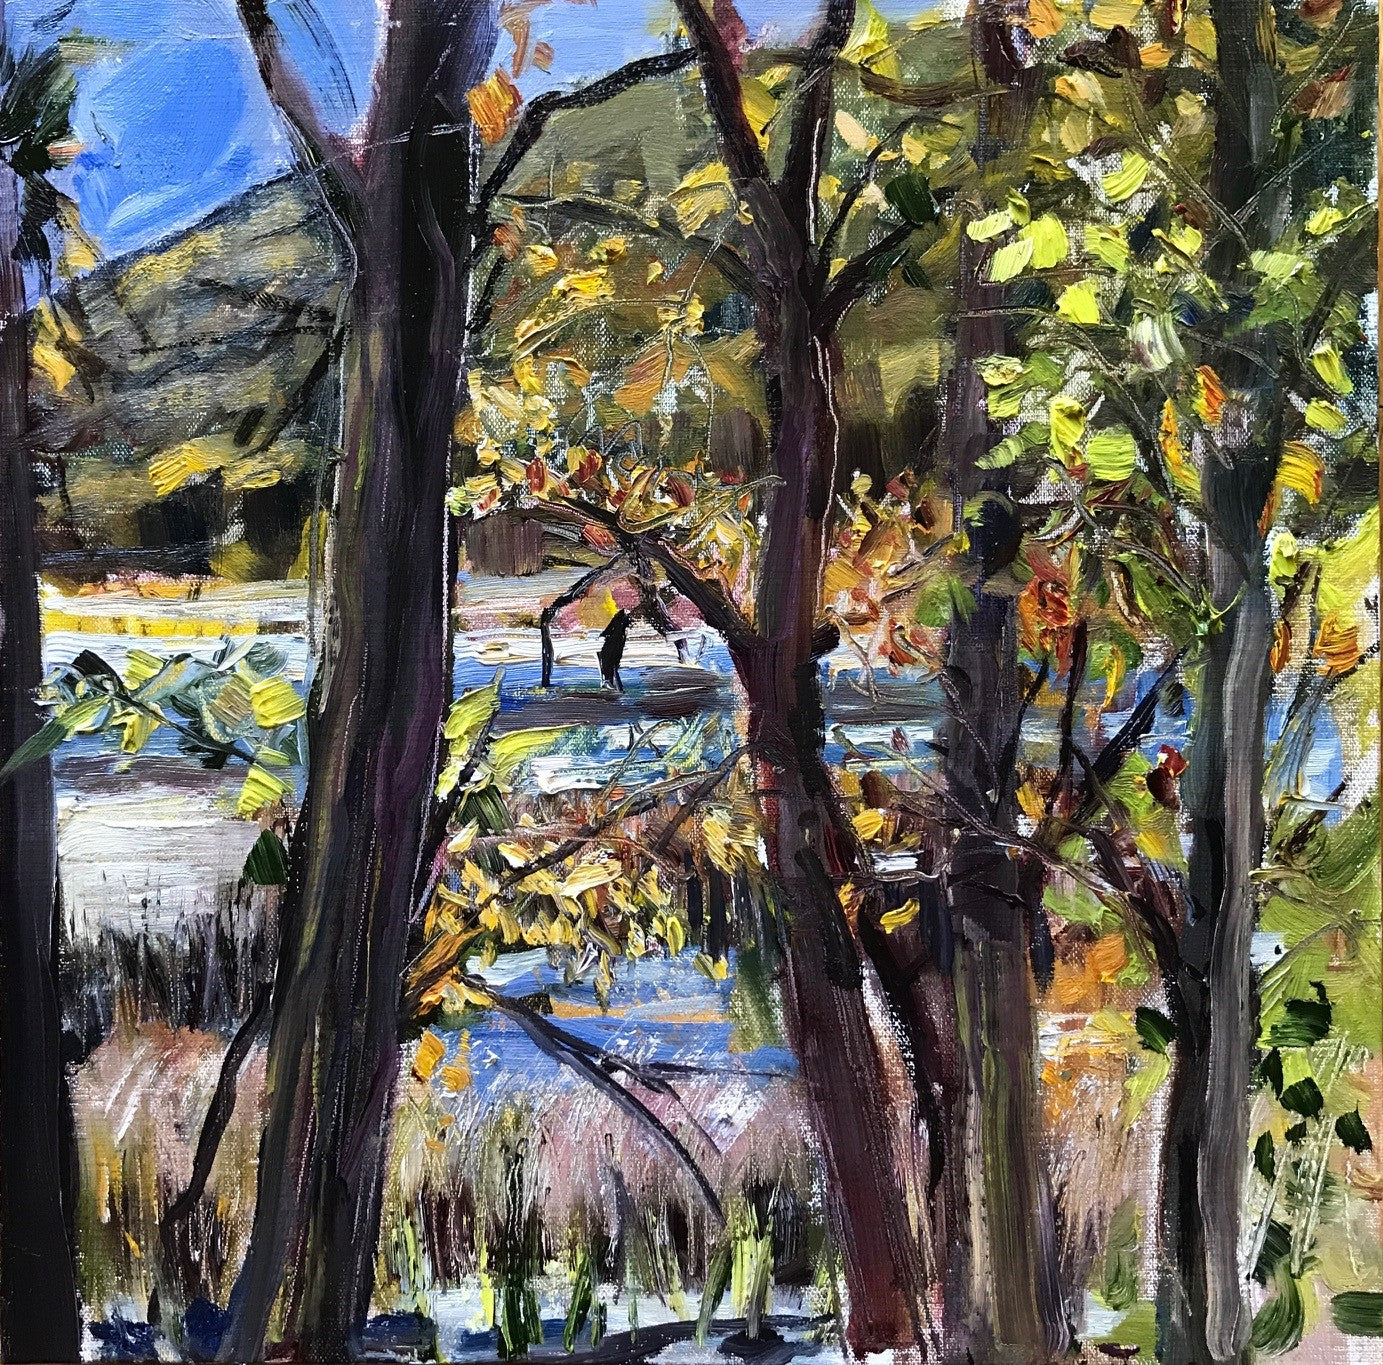 Thompson Pond, Through the Trees, 1:00 pm, October 9th, 2020